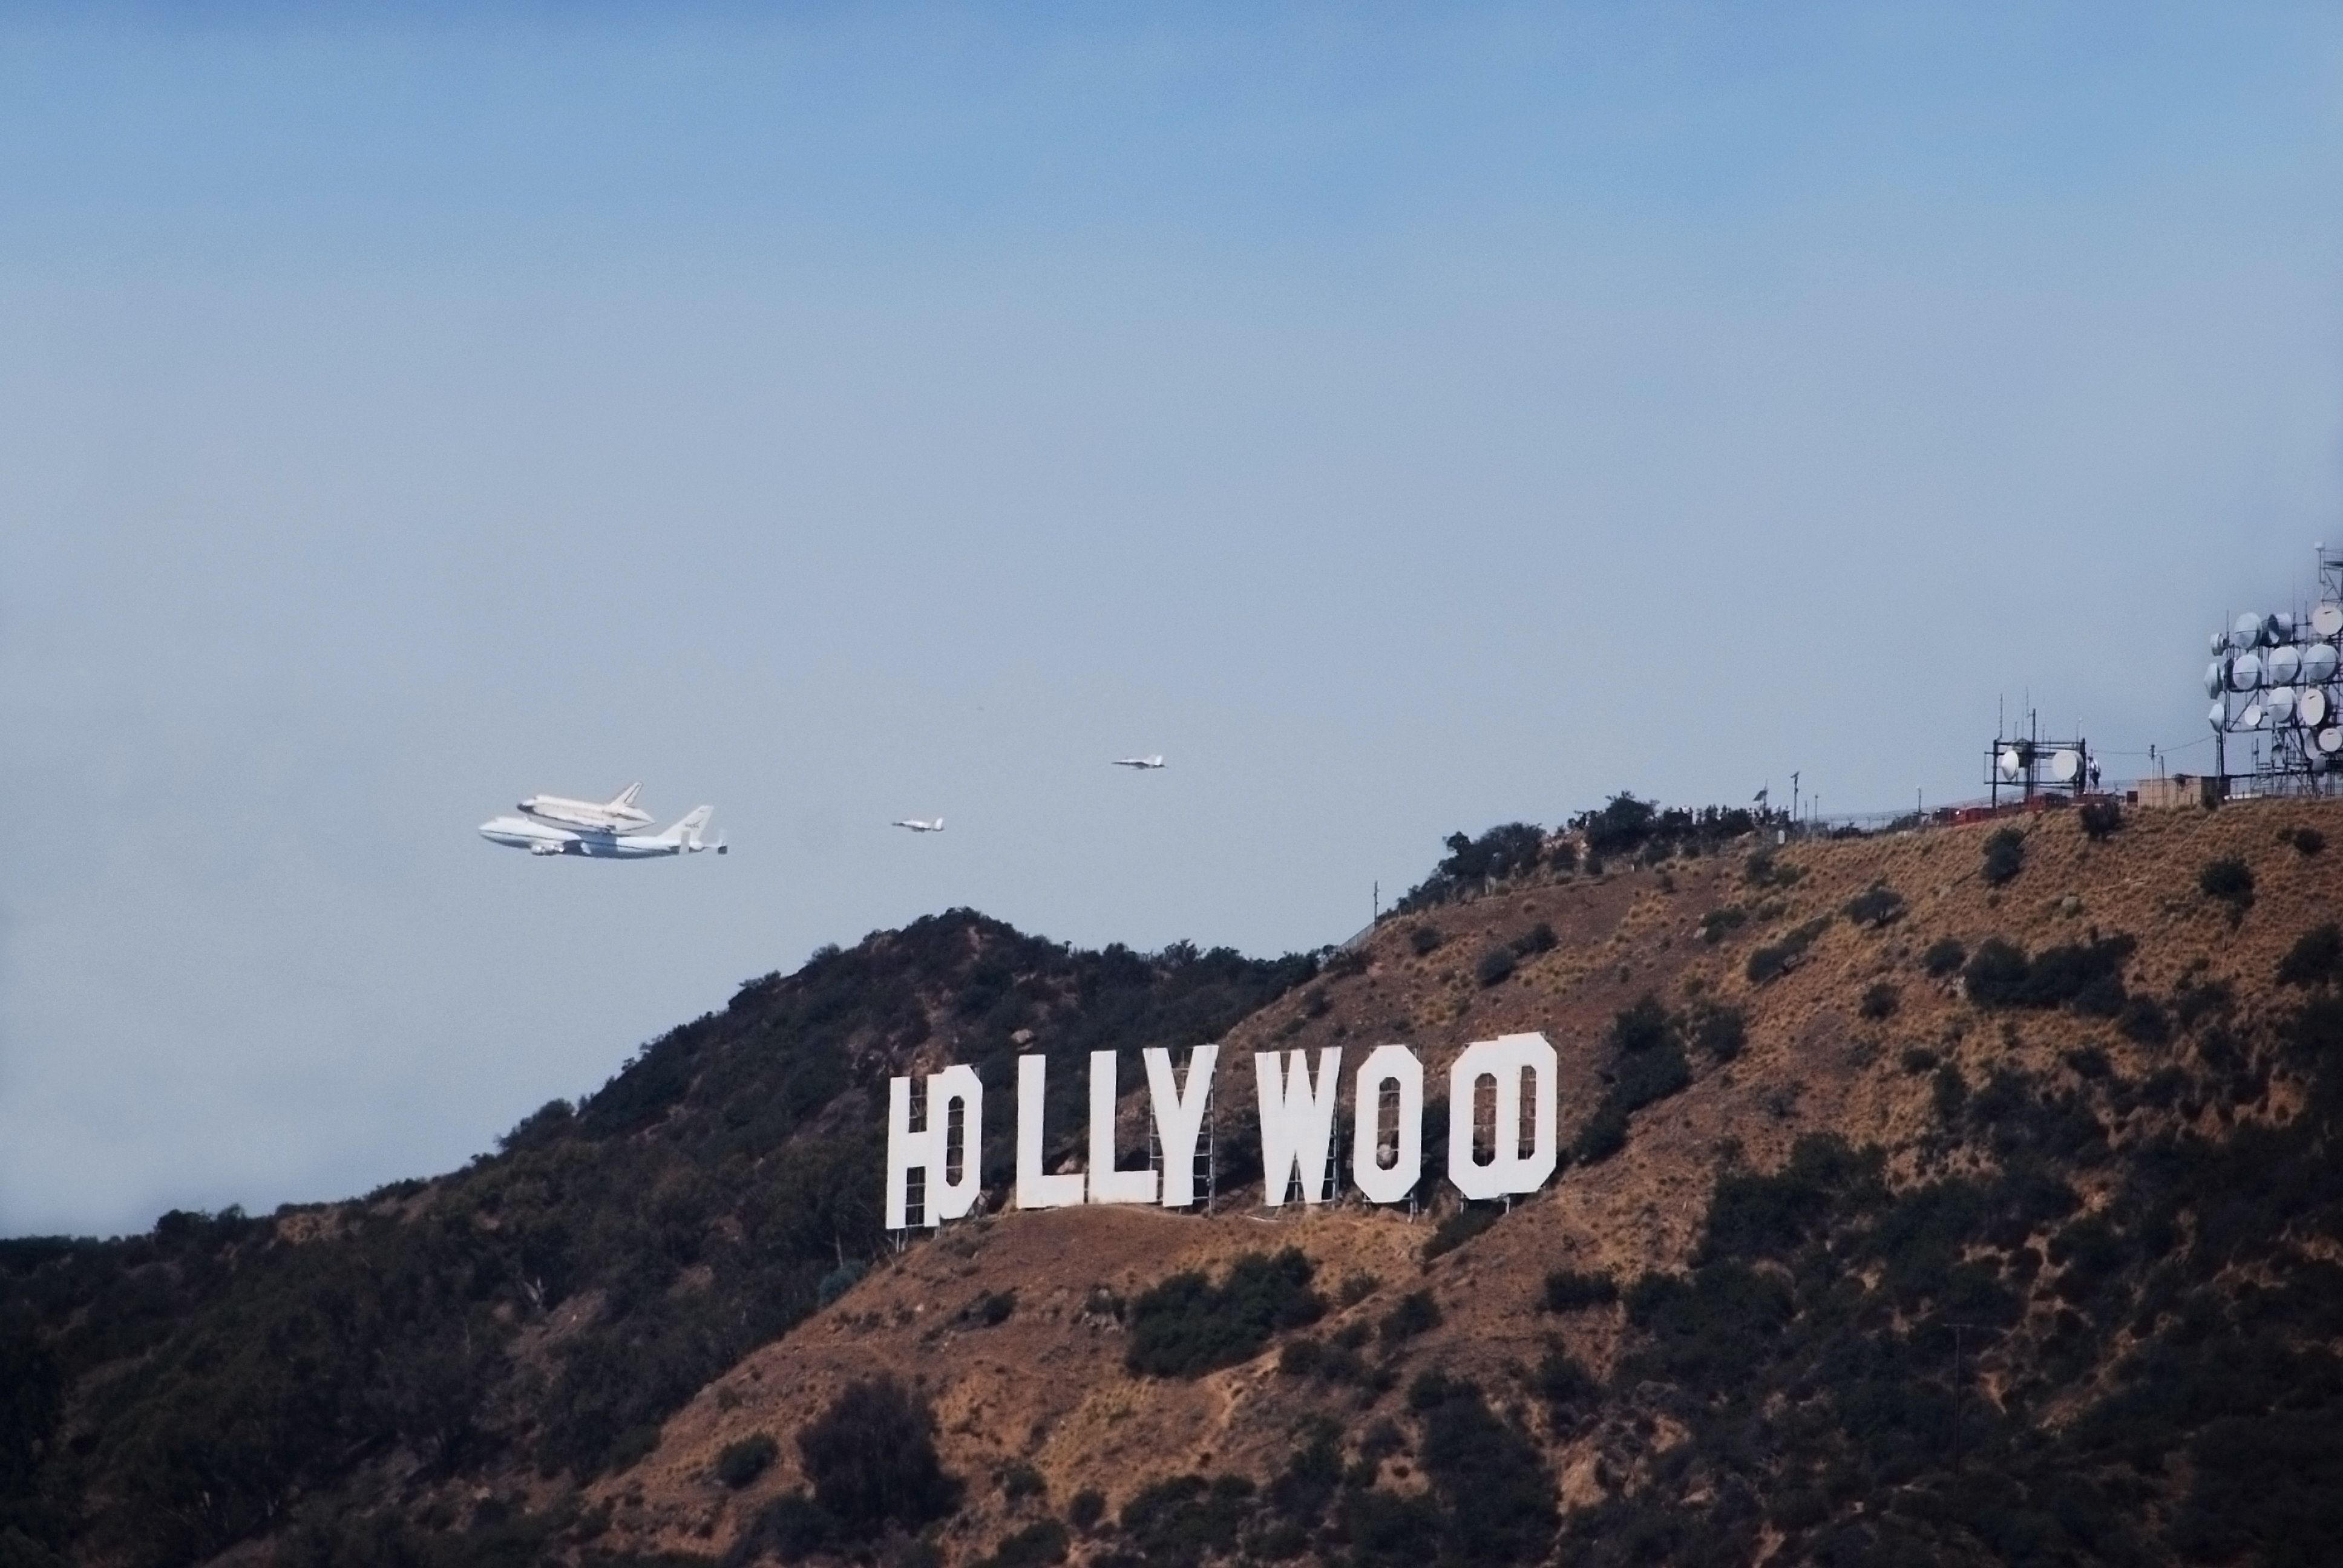 The famous Hollywood sign with a Boeing 747 carrying a space shuttle in the background.